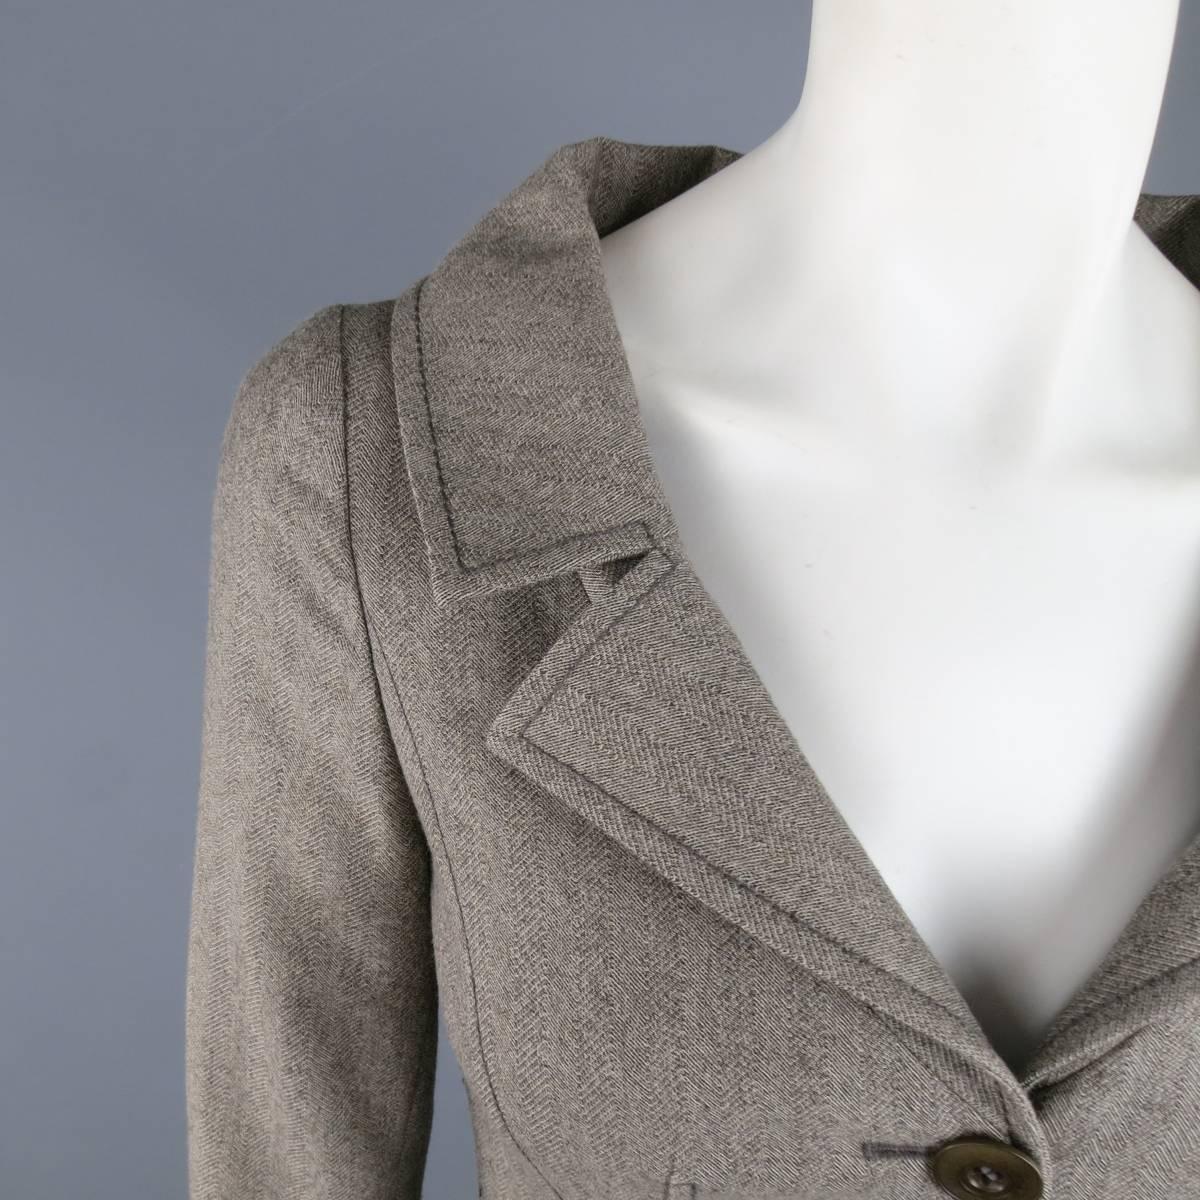 Cropped blazer by VALENTINO in a gray and taupe Herringbone print fabric featuring a wide lapel collar, two button closure, and slit cuffs. Made in Italy.
 
Excellent Pre-Owned Condition.
Marked: 40 / 4
 
Measurements:
 
Shoulder: 14 in.
Bust: 32